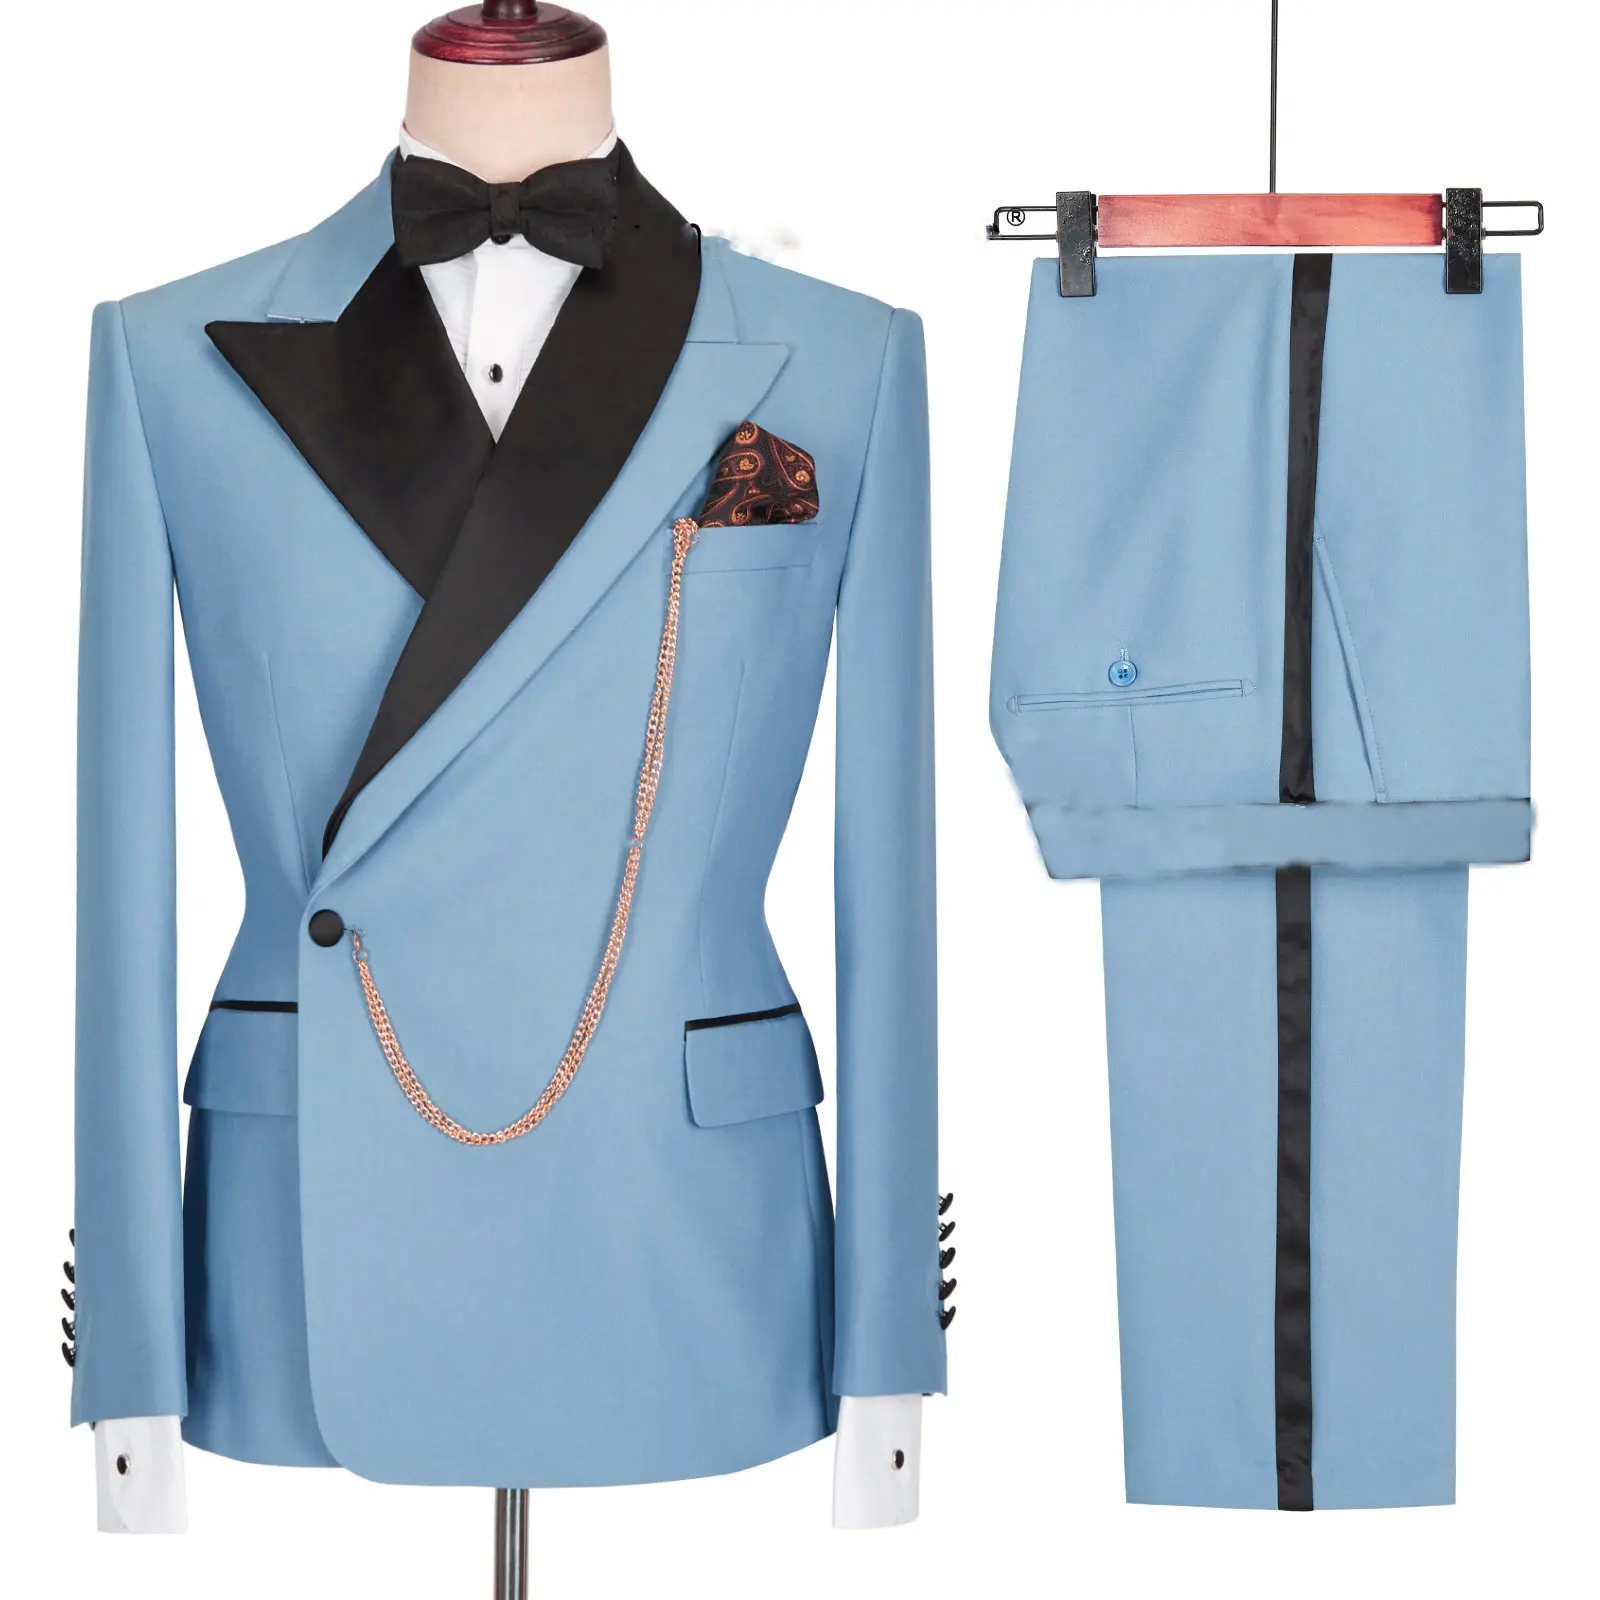 2022 Tailor Made Light Blue Groom Tuxedo Formal Double Breasted Men Suit Prom Wedding Party Mens Suits Costume ( jacket+Pants)